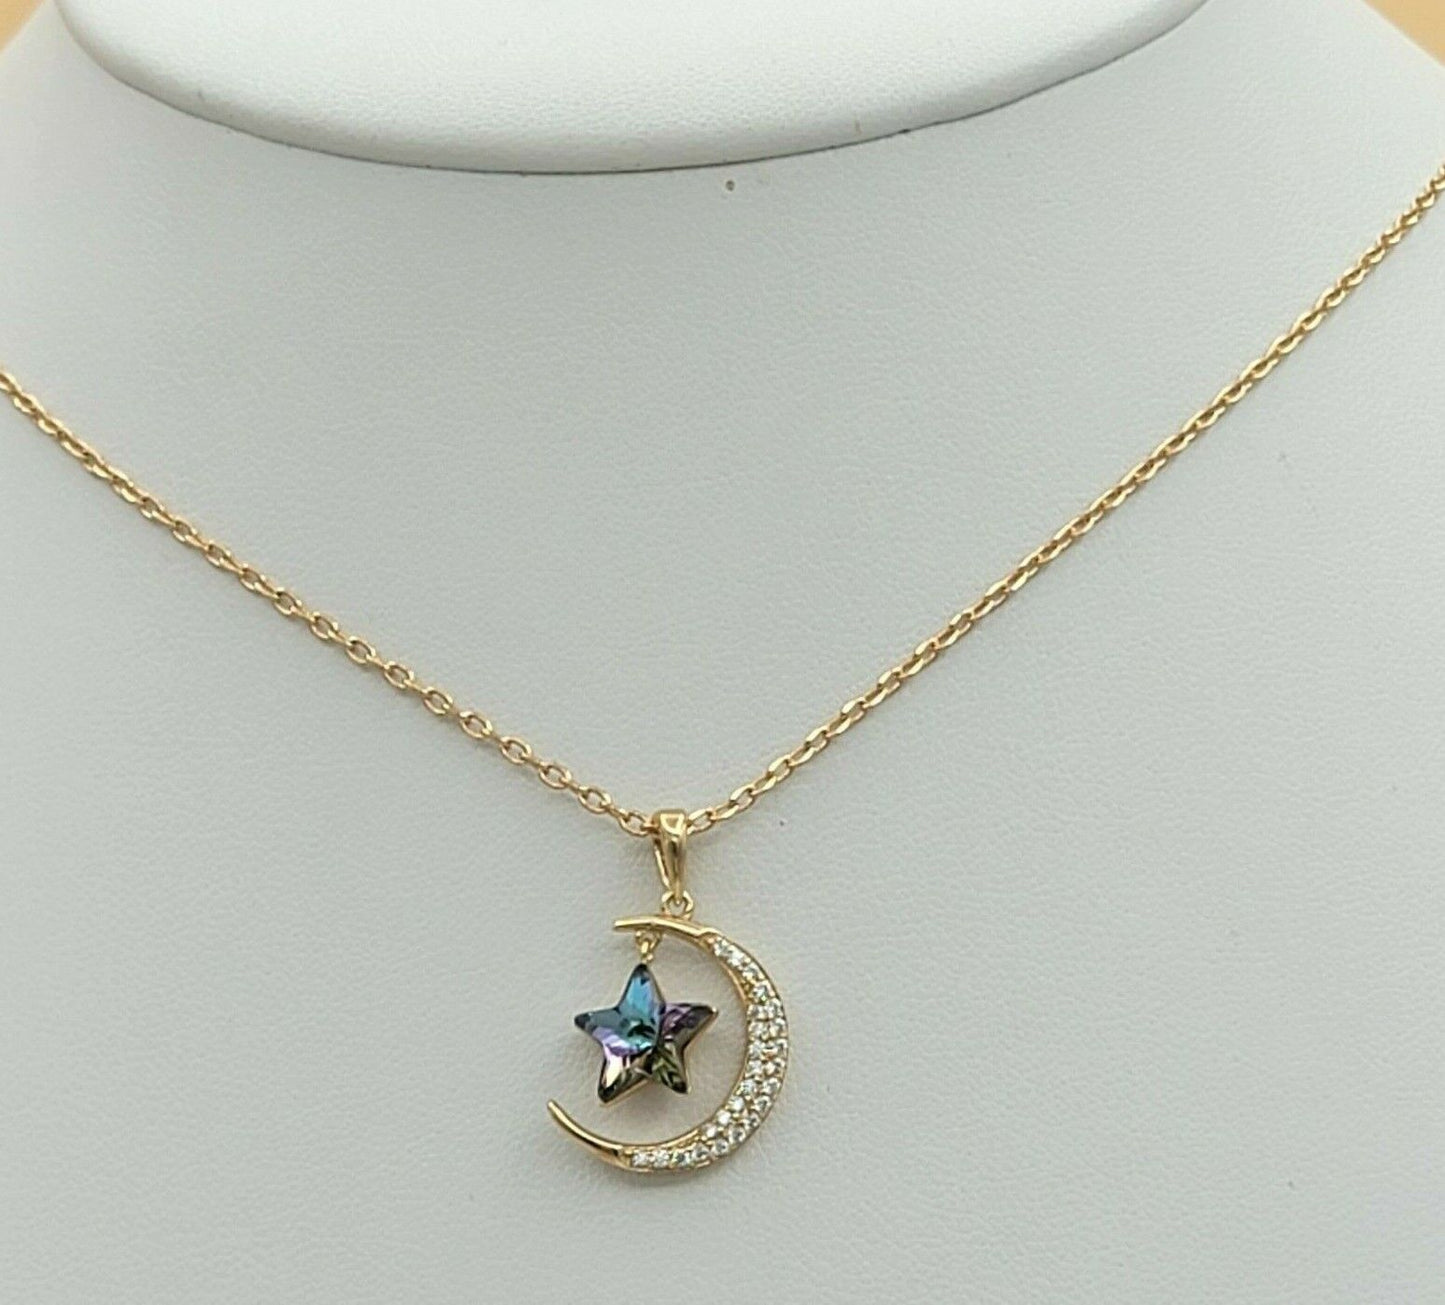 Necklaces - 18K Gold Plated. Crescent Moon & Movable Shiny Crystal Star Pendant & Chain.